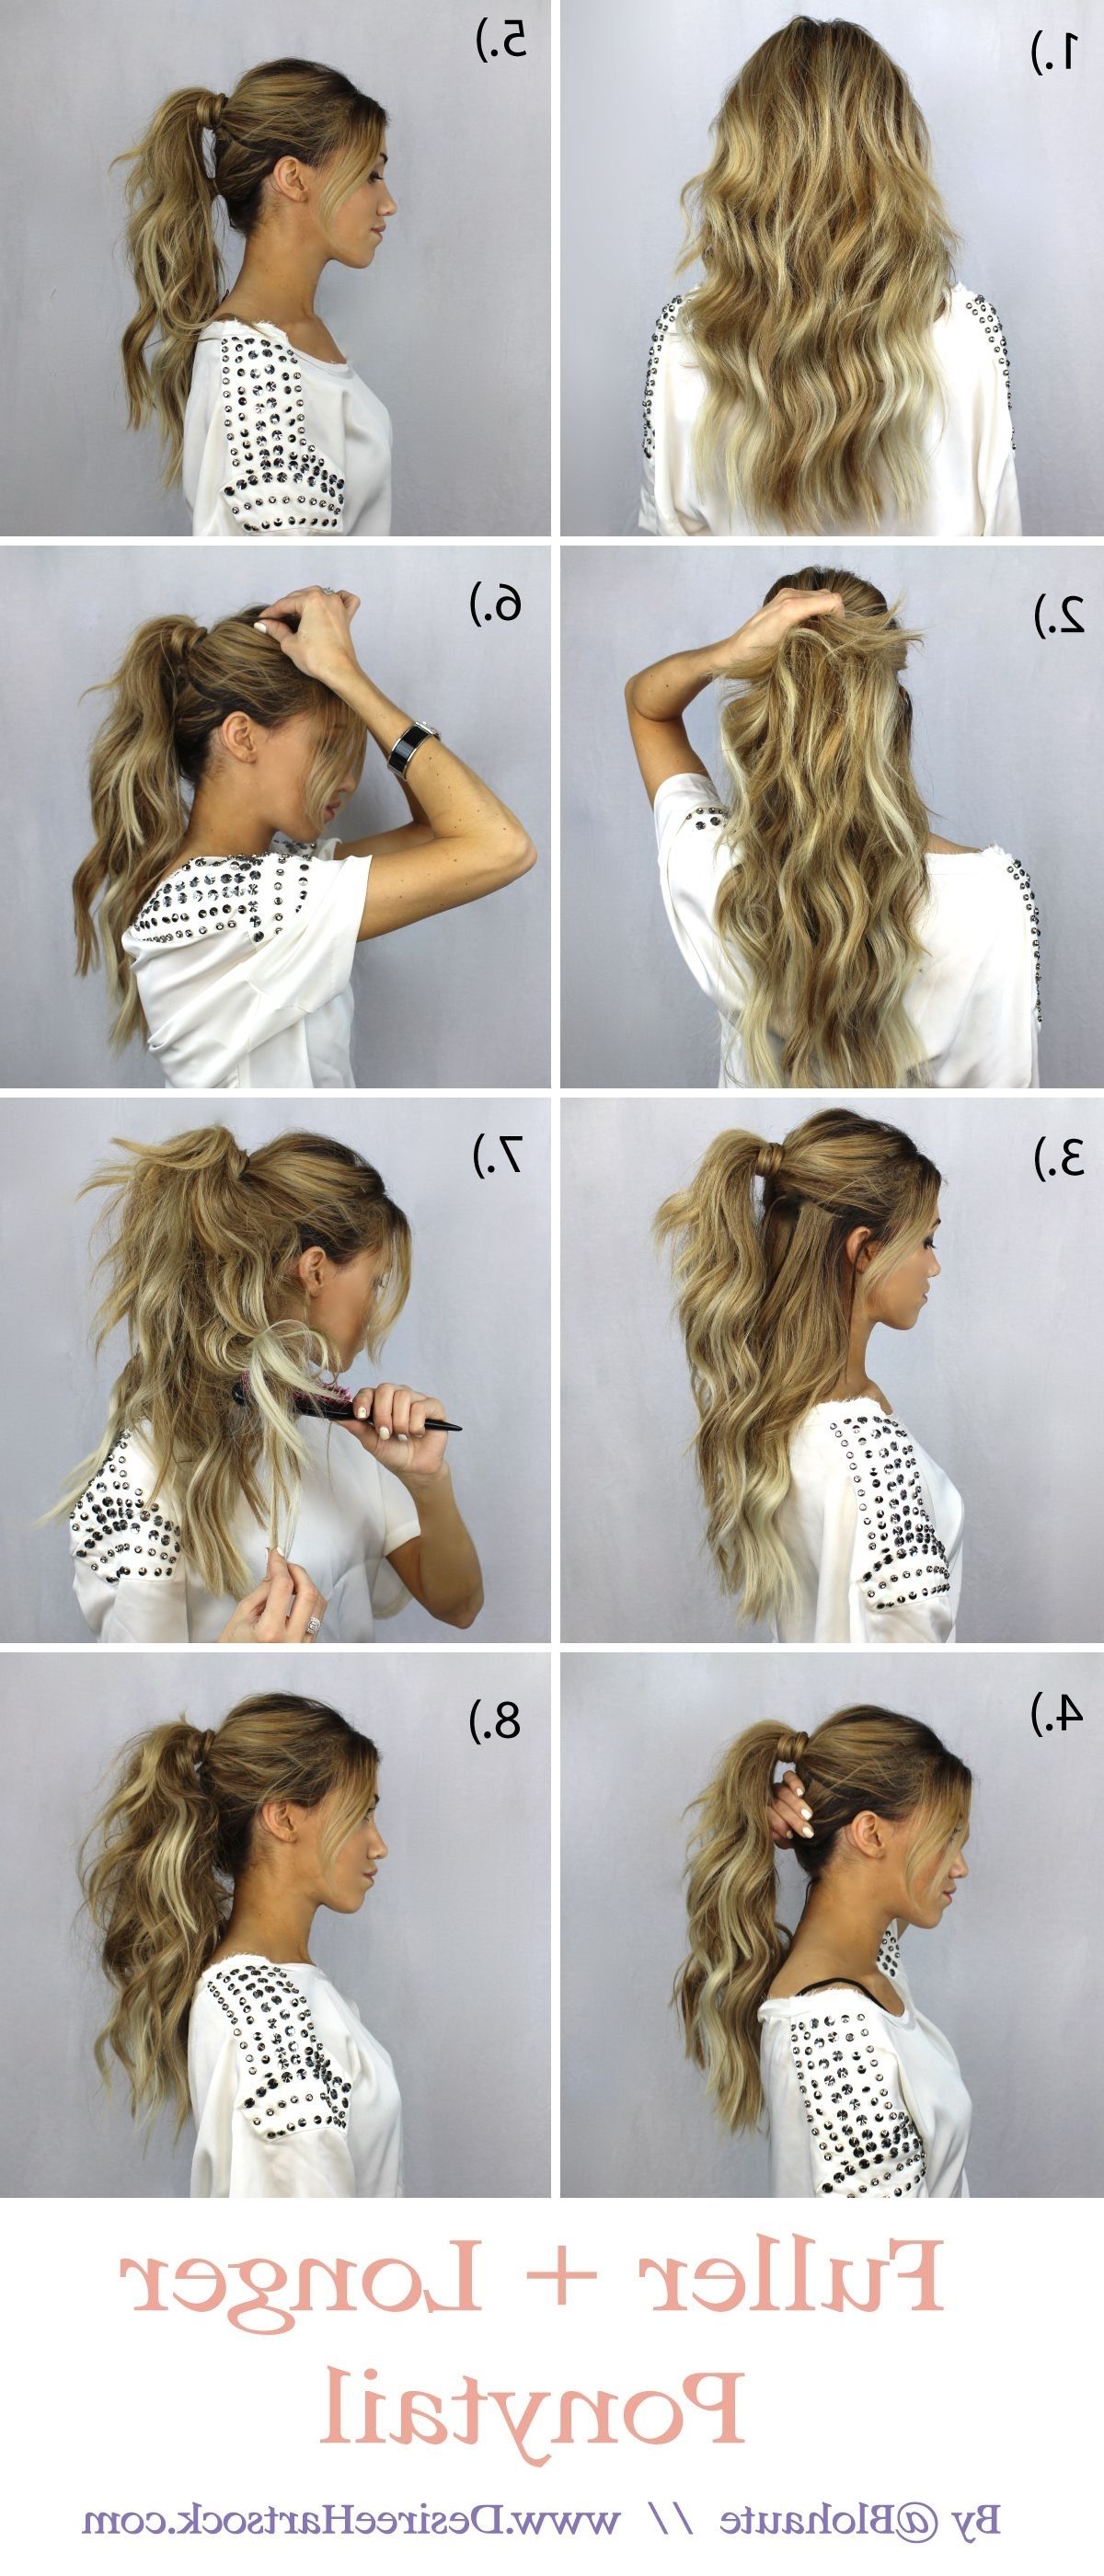 Well Known Chic Ponytail Hairstyles With Added Volume Throughout With Thin Hair And A Lot Of It That I Have, I Needed A Tutorial That (View 10 of 20)